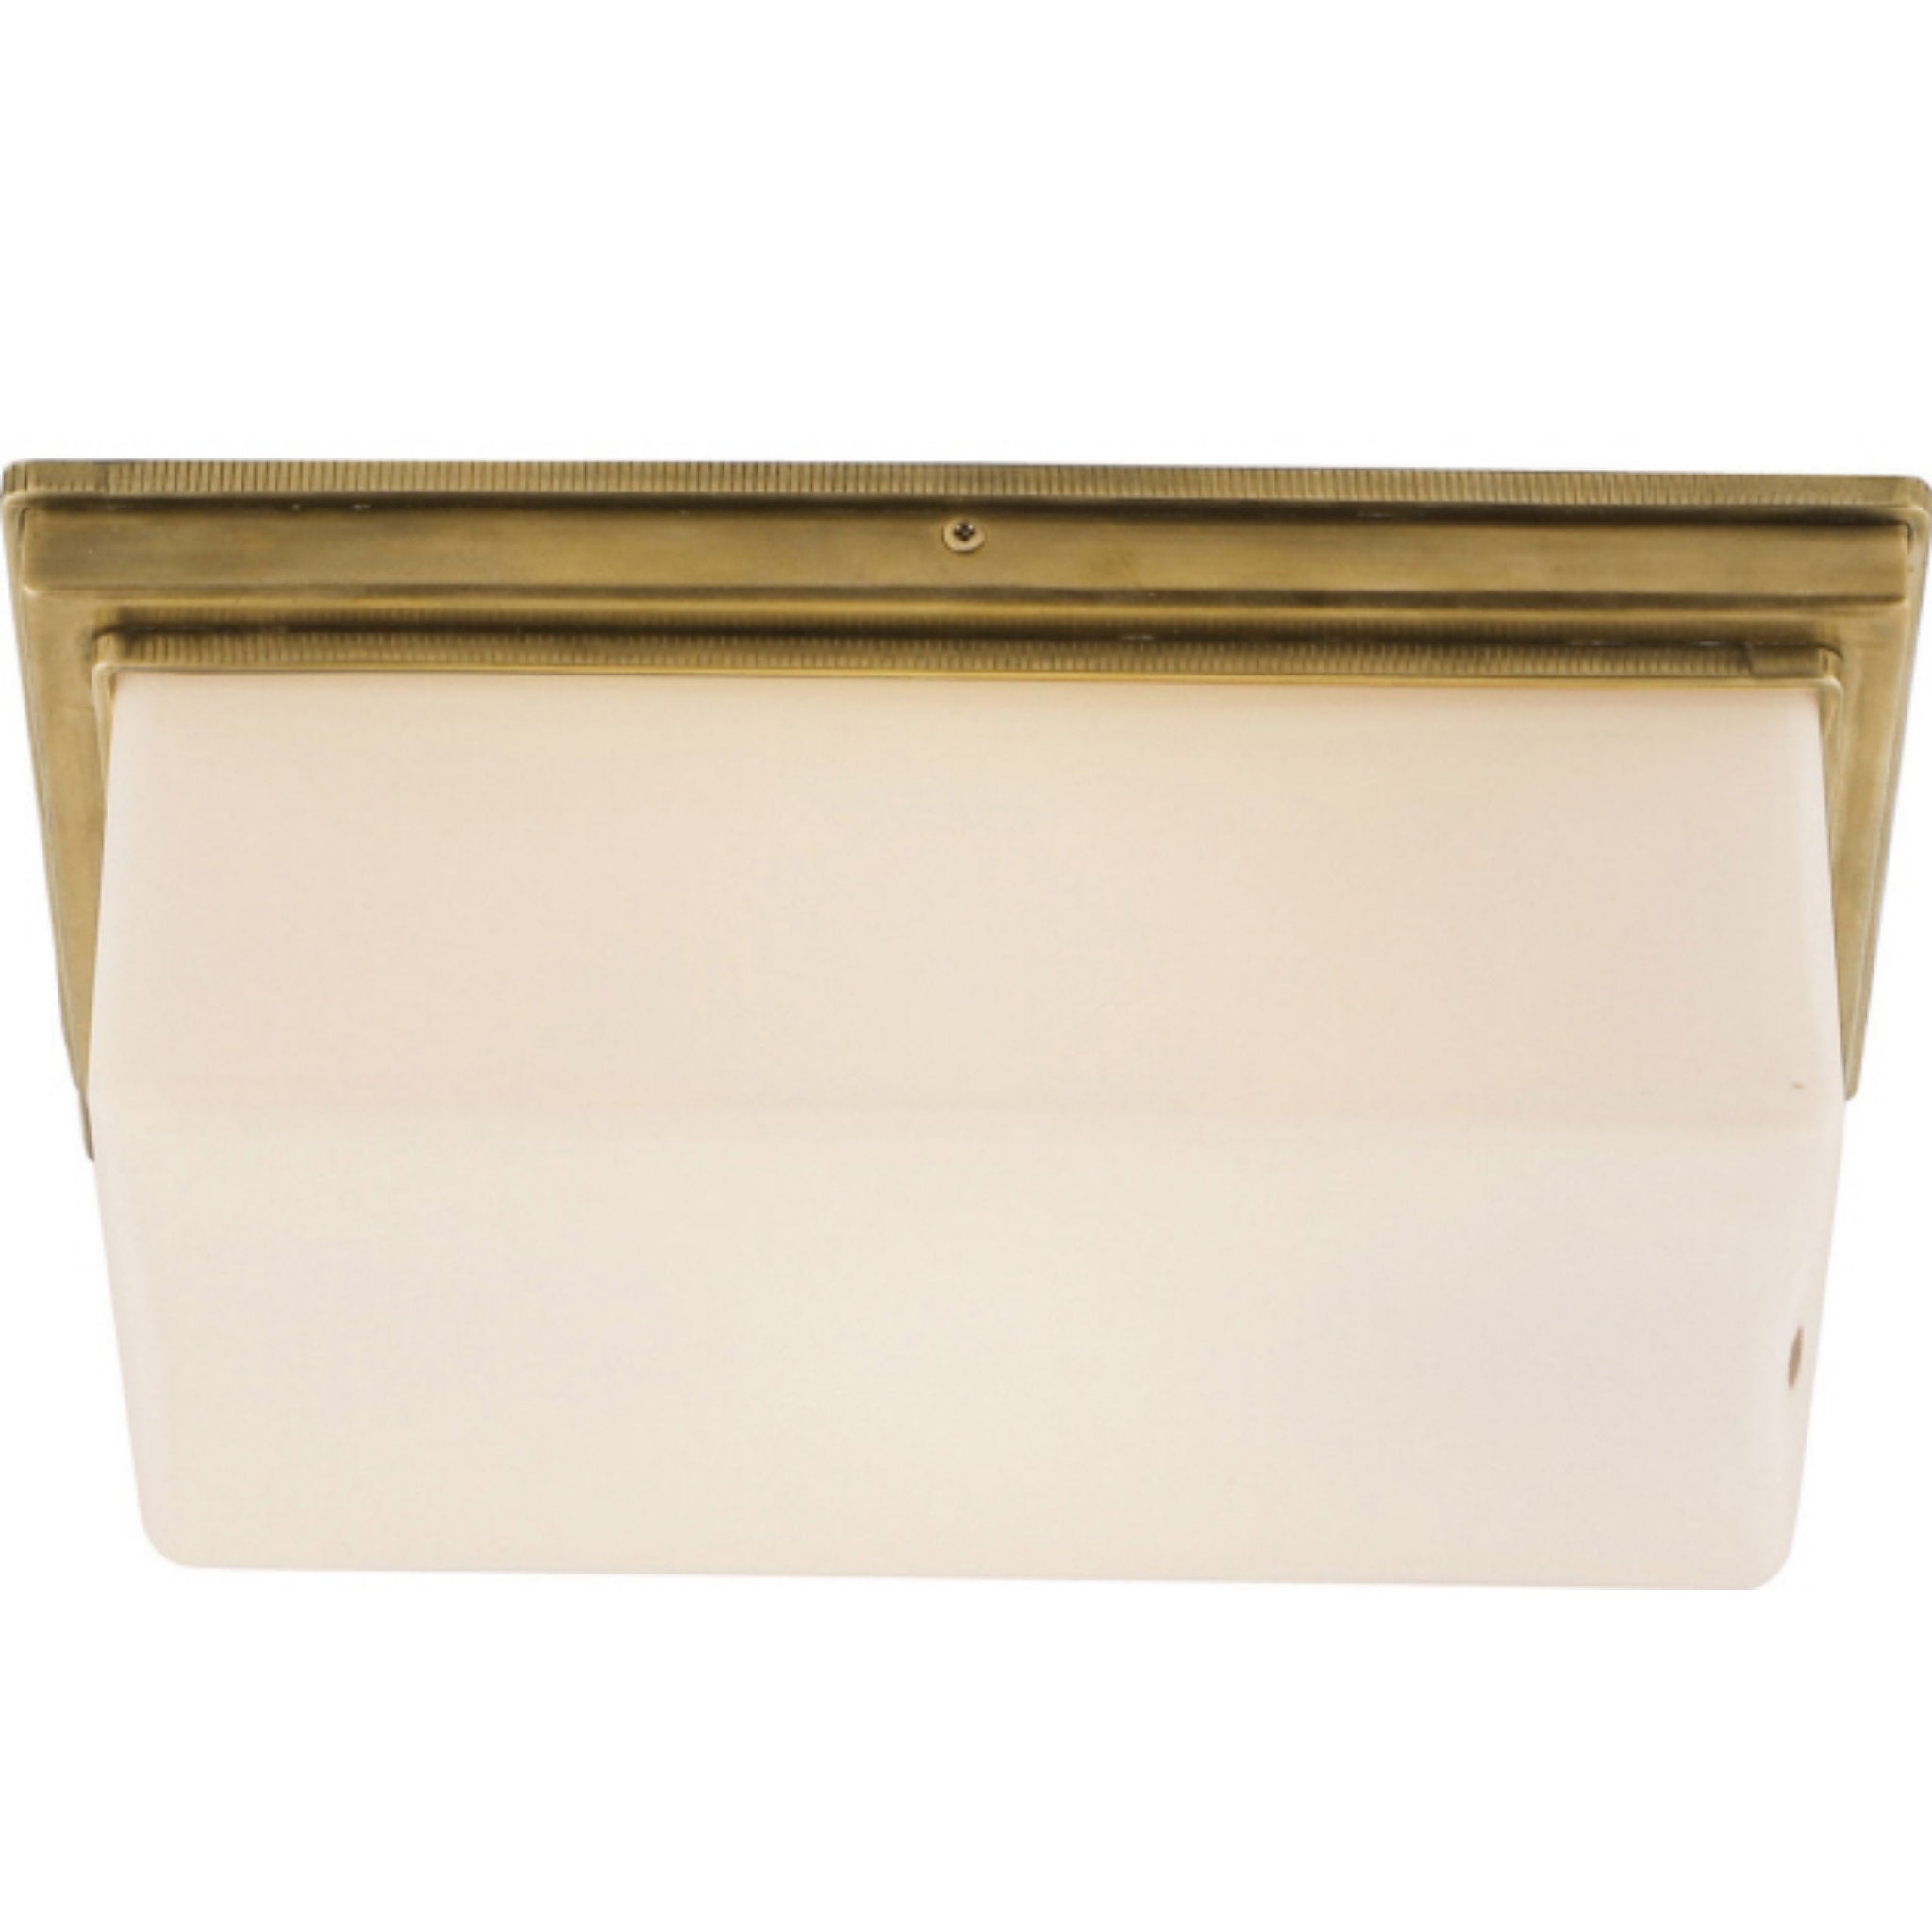 Thomas O'Brien Newhouse Block Wall/Ceiling Light in Hand-Rubbed Antique Brass with White Glass